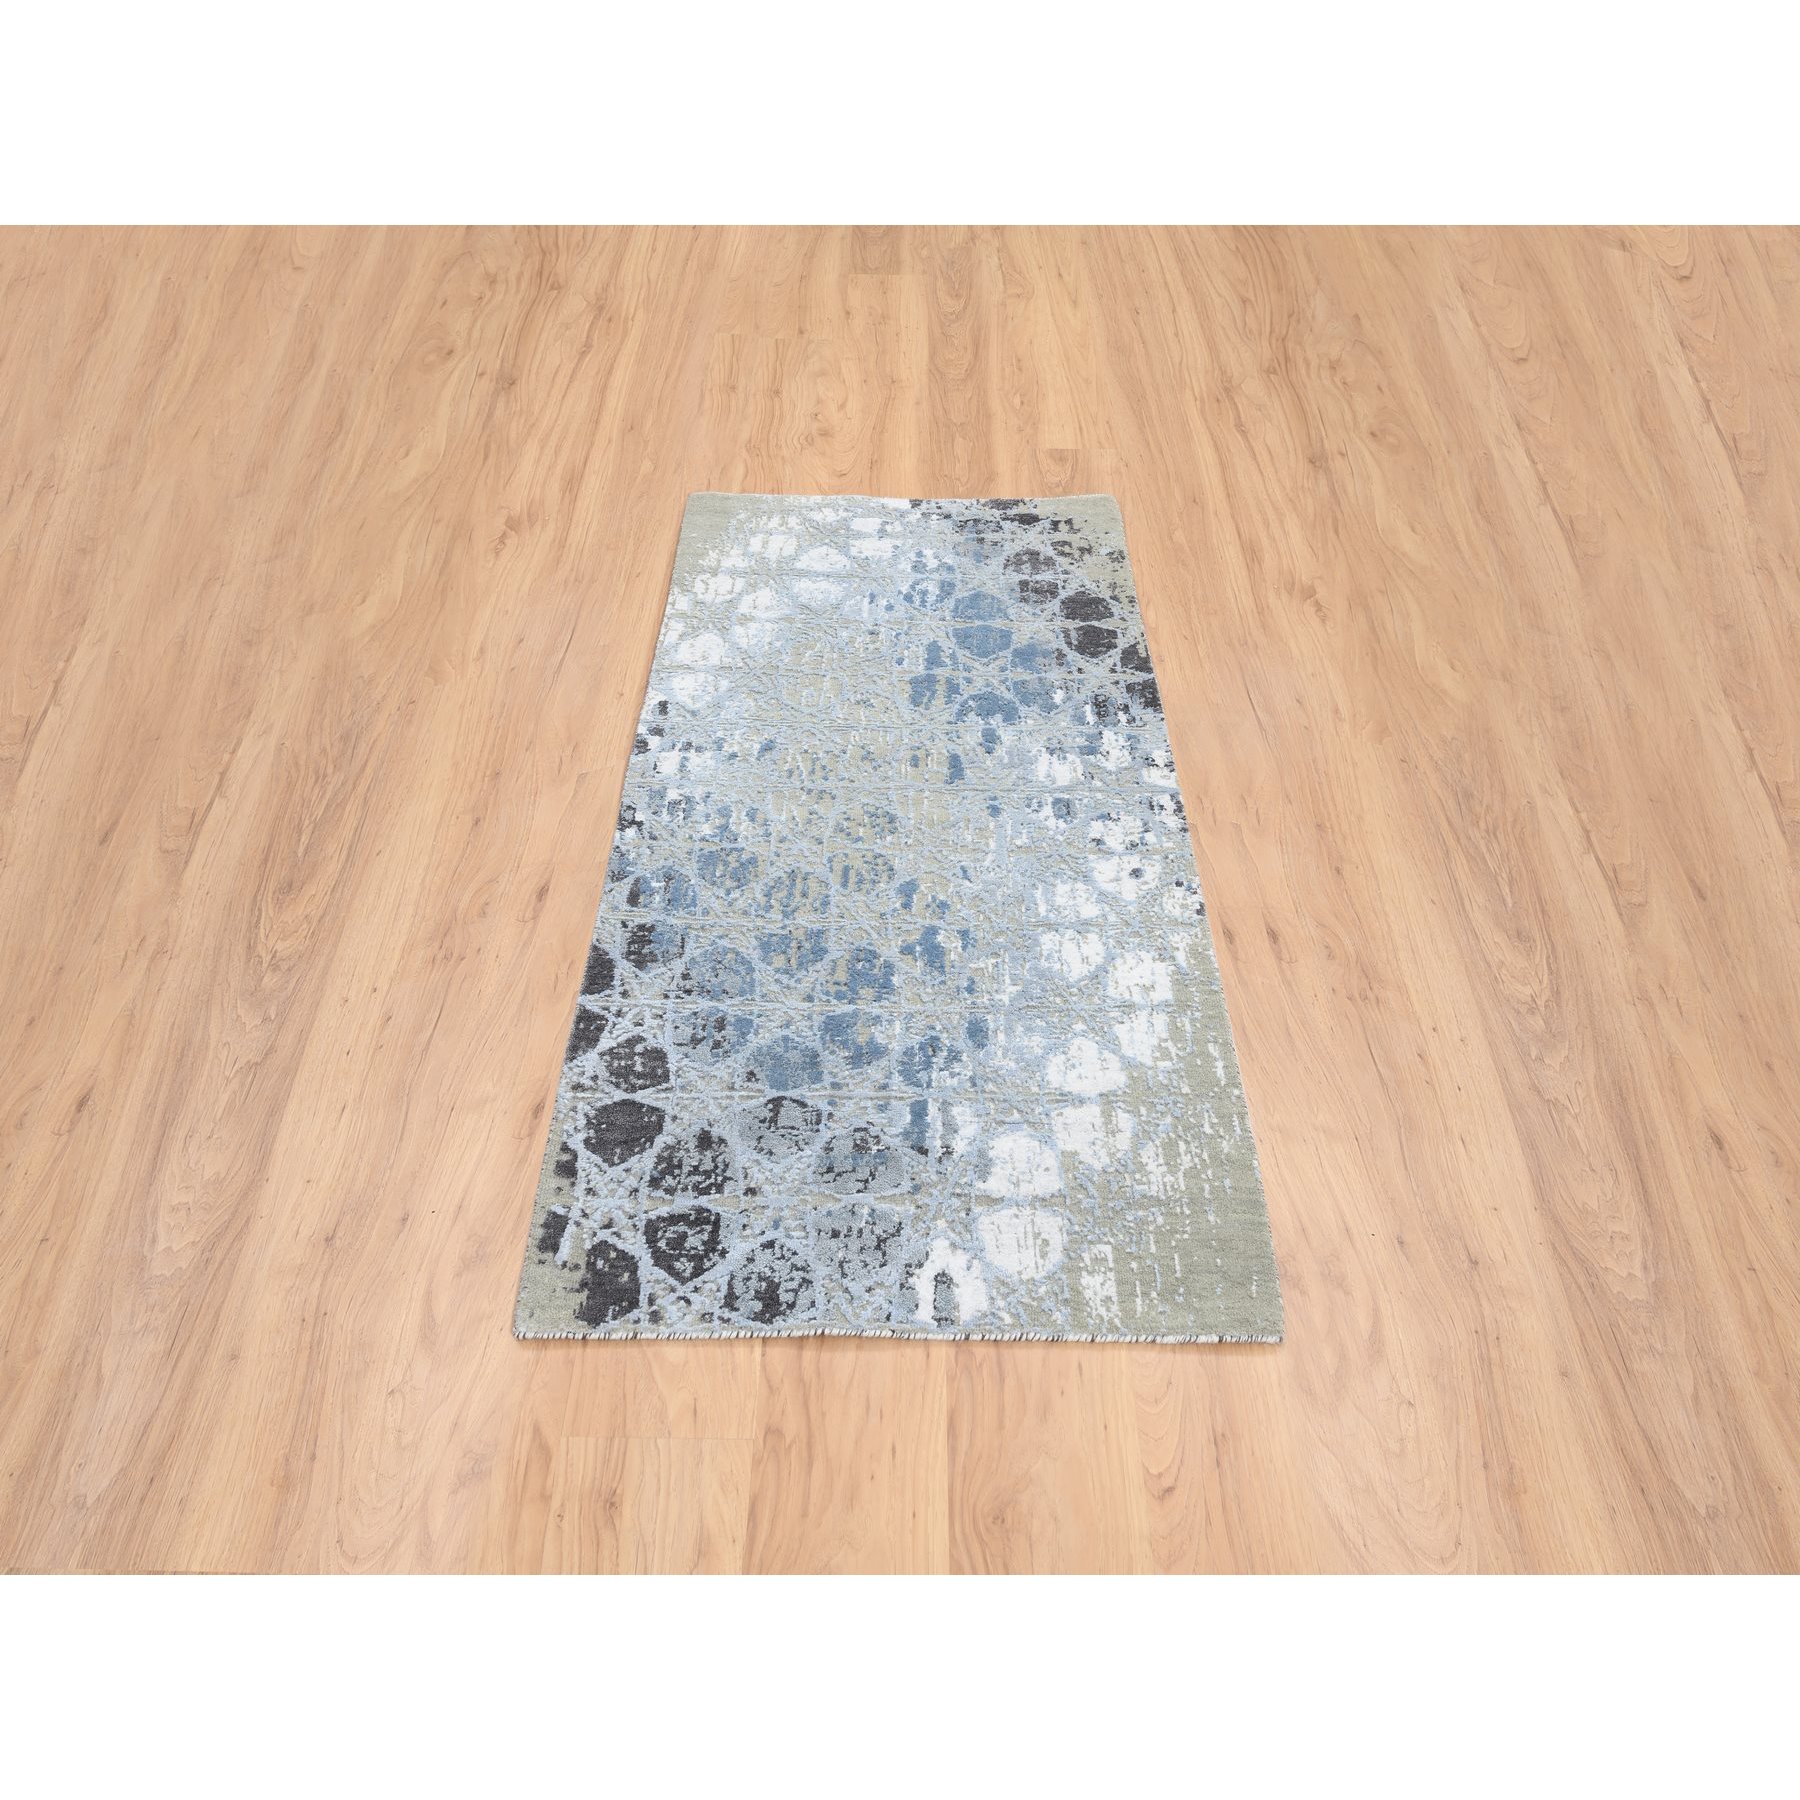 2'9"x5'8" Gray and Blue, Hand Woven THE HONEYCOMB Award Winning Design, Wool and Silk, Oriental Rug 